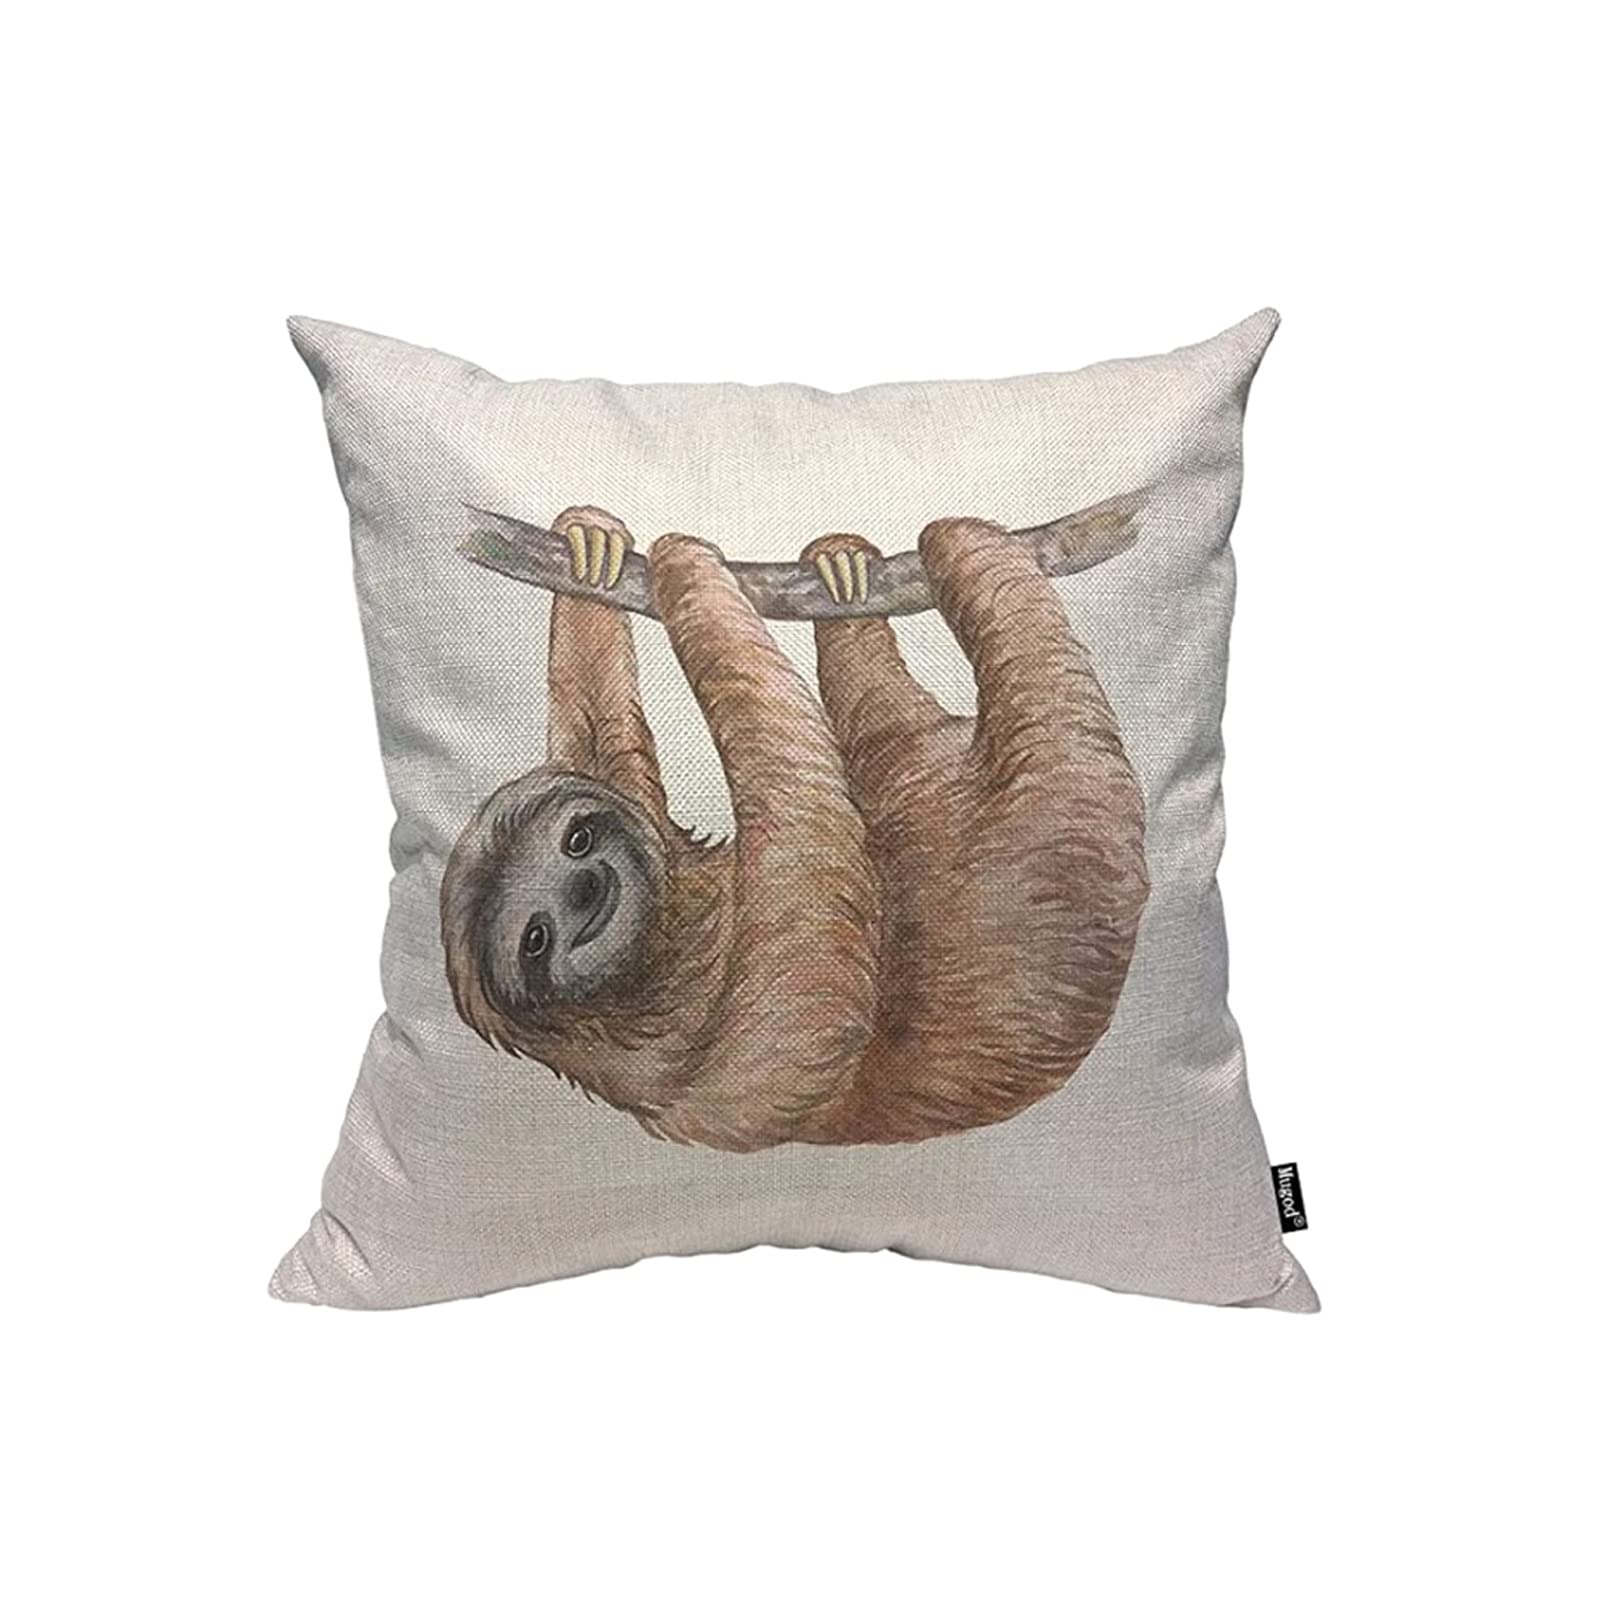 Brown Sloth Cushion Cover Baby Sloth Pillow Case Home Decorative for Living Room, Sofa, Bedroom, Home, 45x45 (CQ0101)